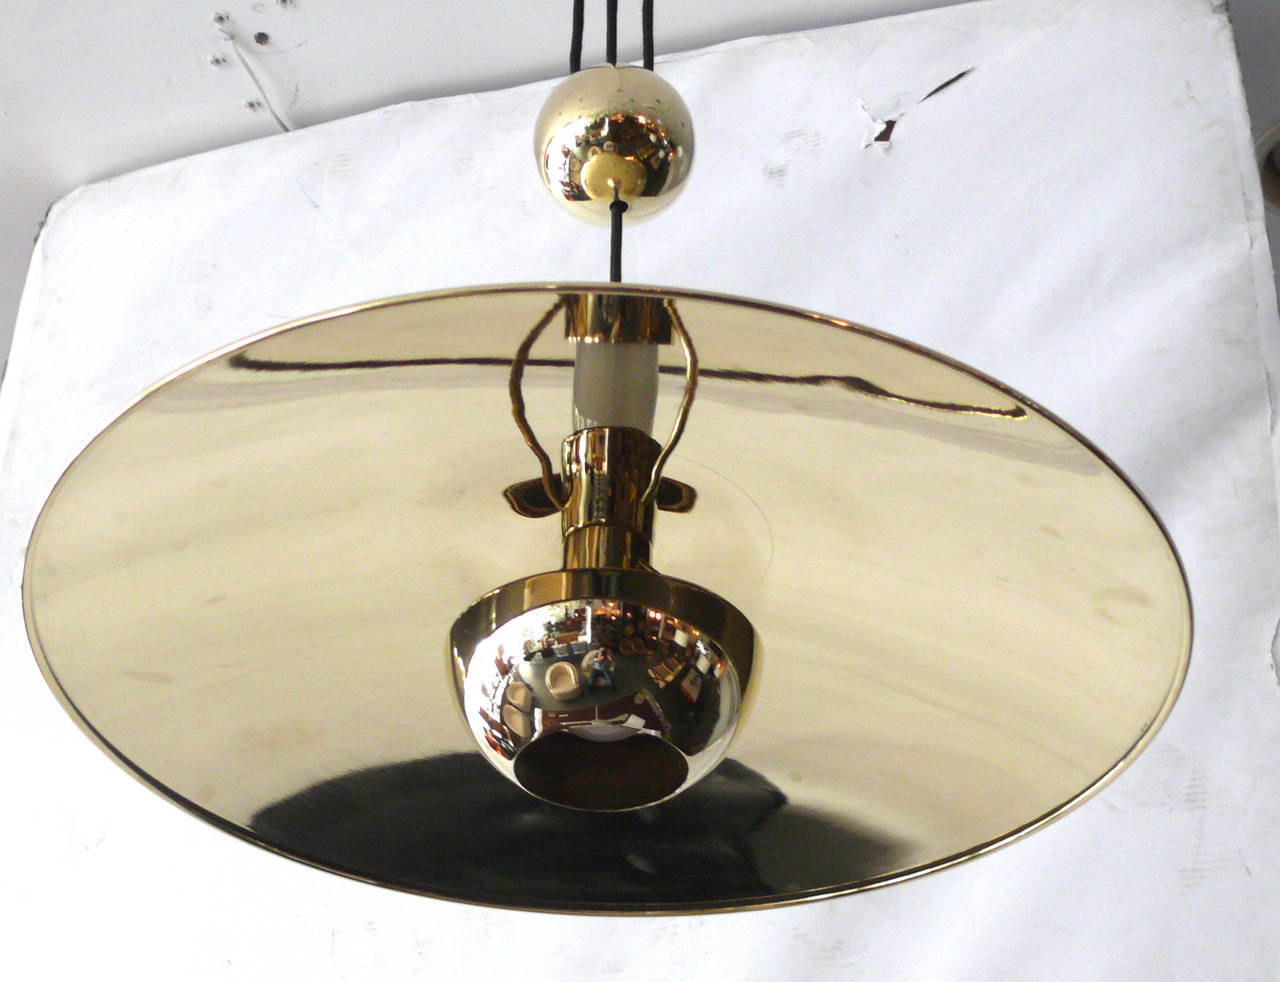 Handsome Florian Schulz counter balance pendant in a polished brass finish. Newly rewired black cloth twist covered cord. Easily adjustable height. Excellent vintage condition. Additional Florian Schulz pendants available.